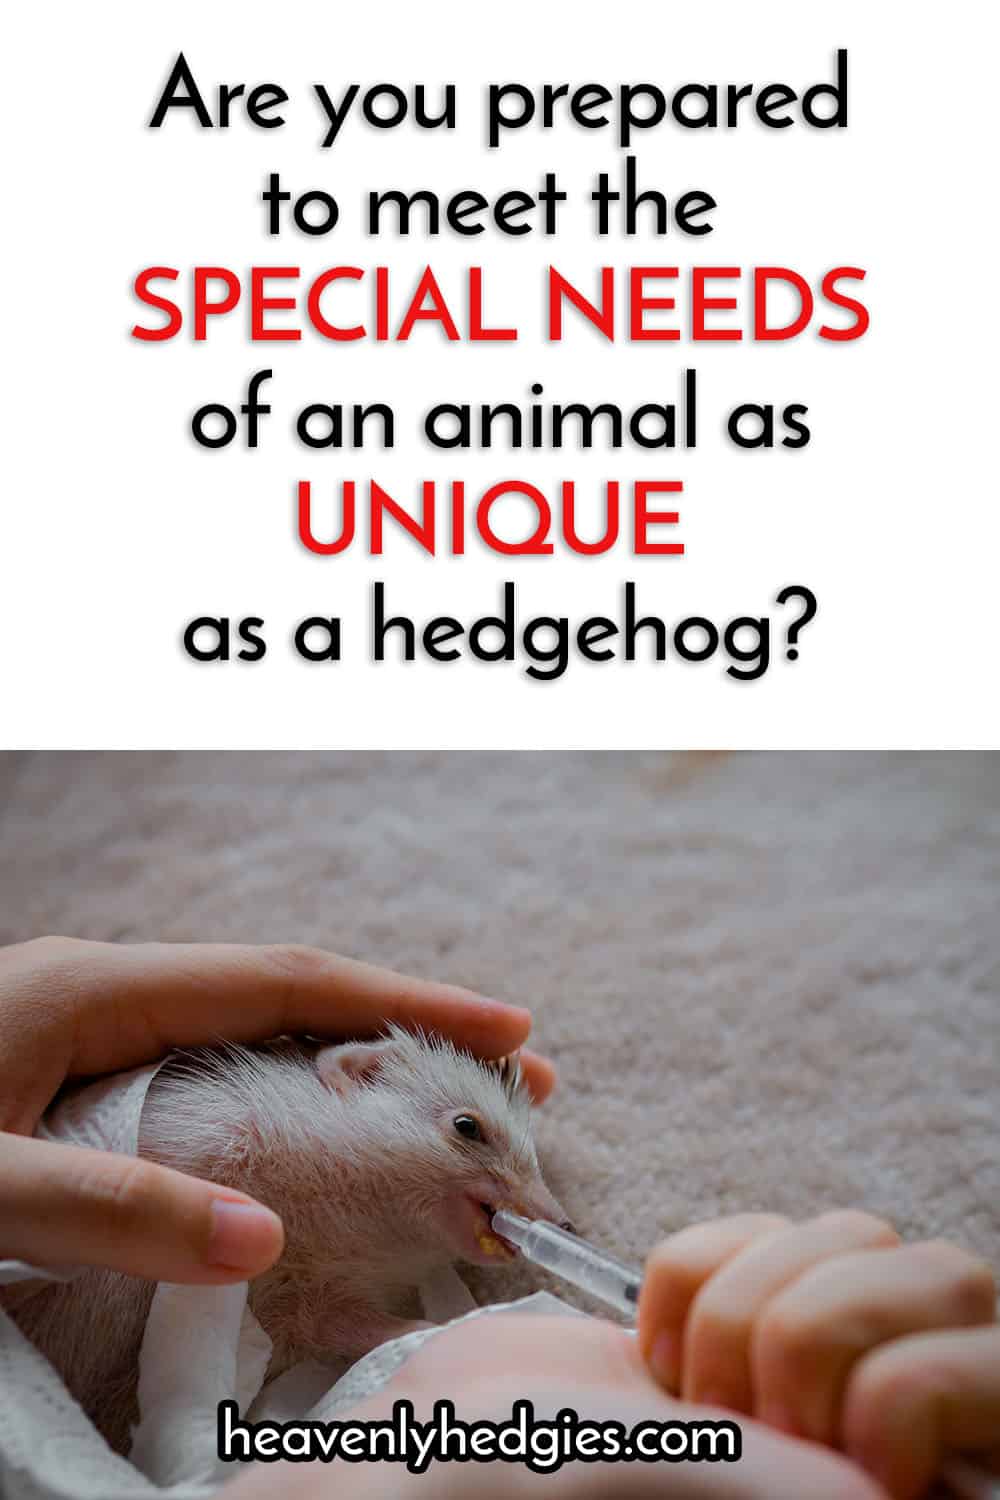 sick hedgehog being given medicine for their special needs